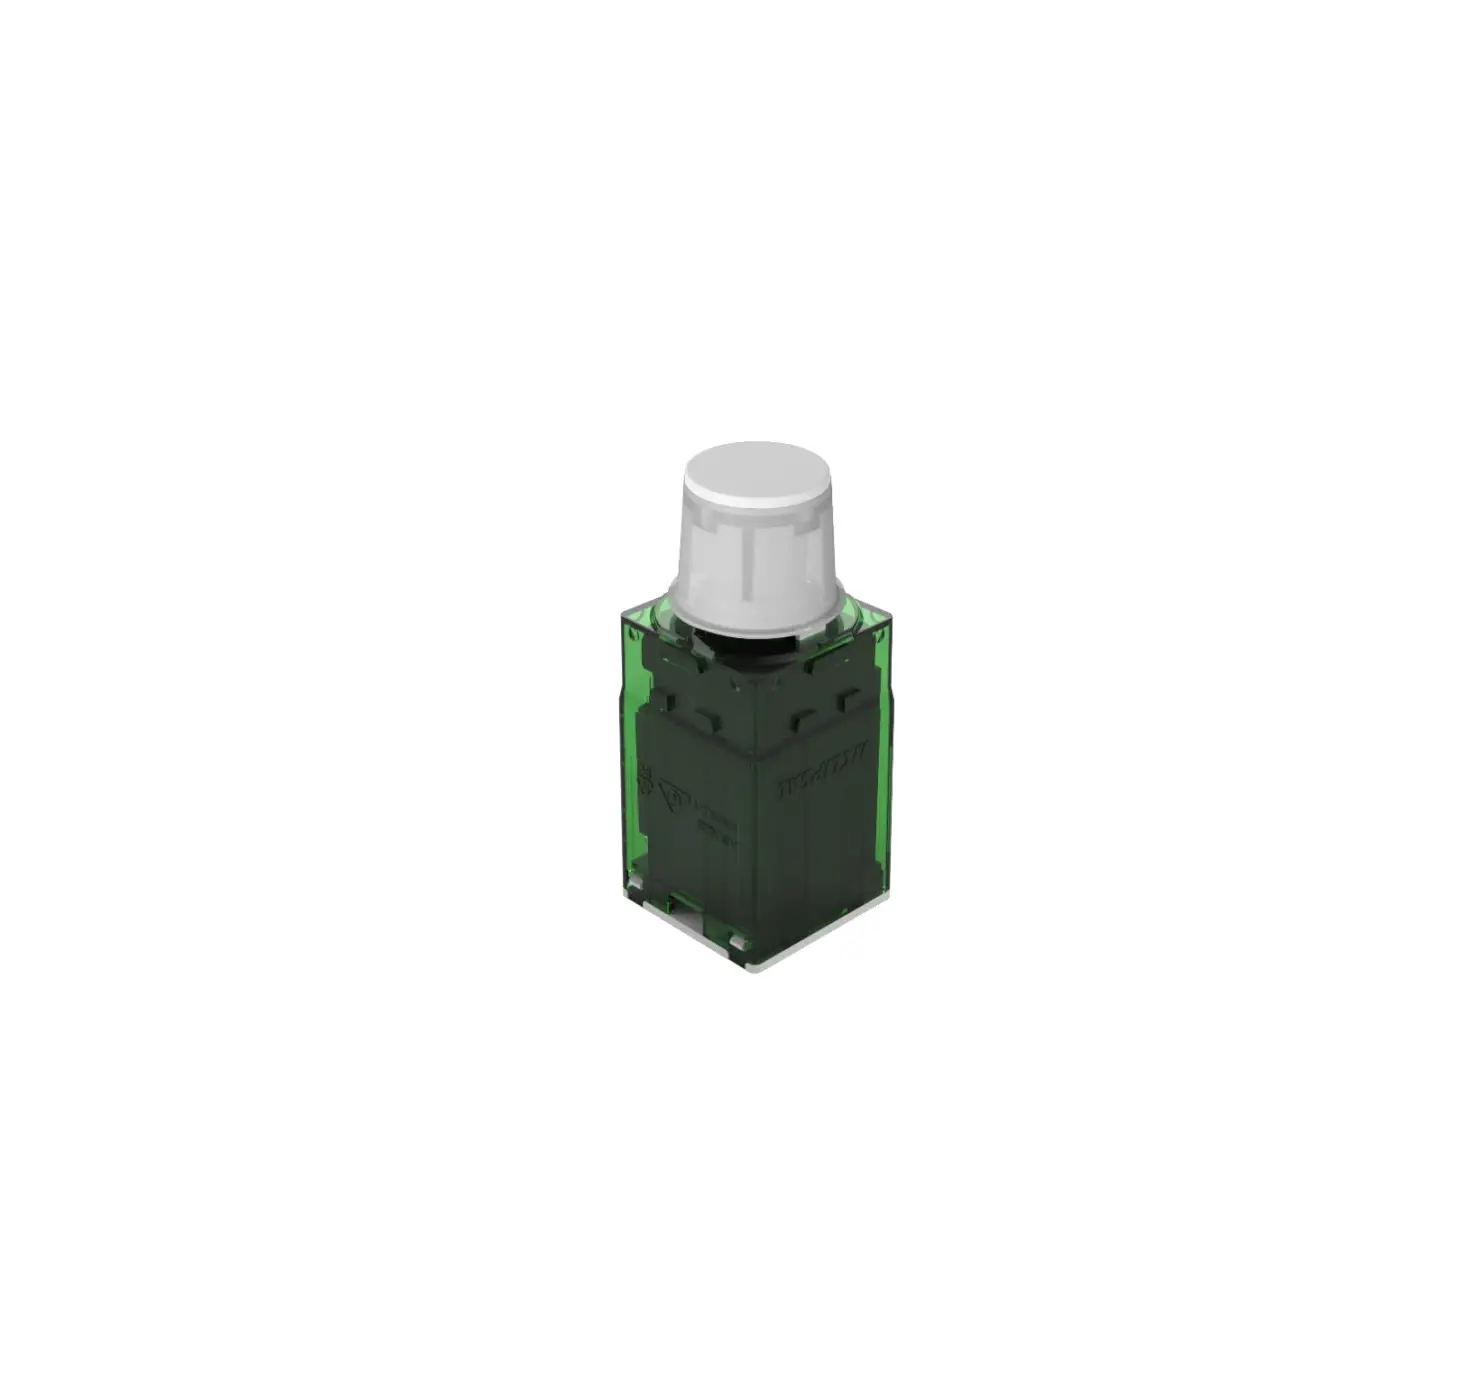 40-Series Module Rotary LED Dimmer